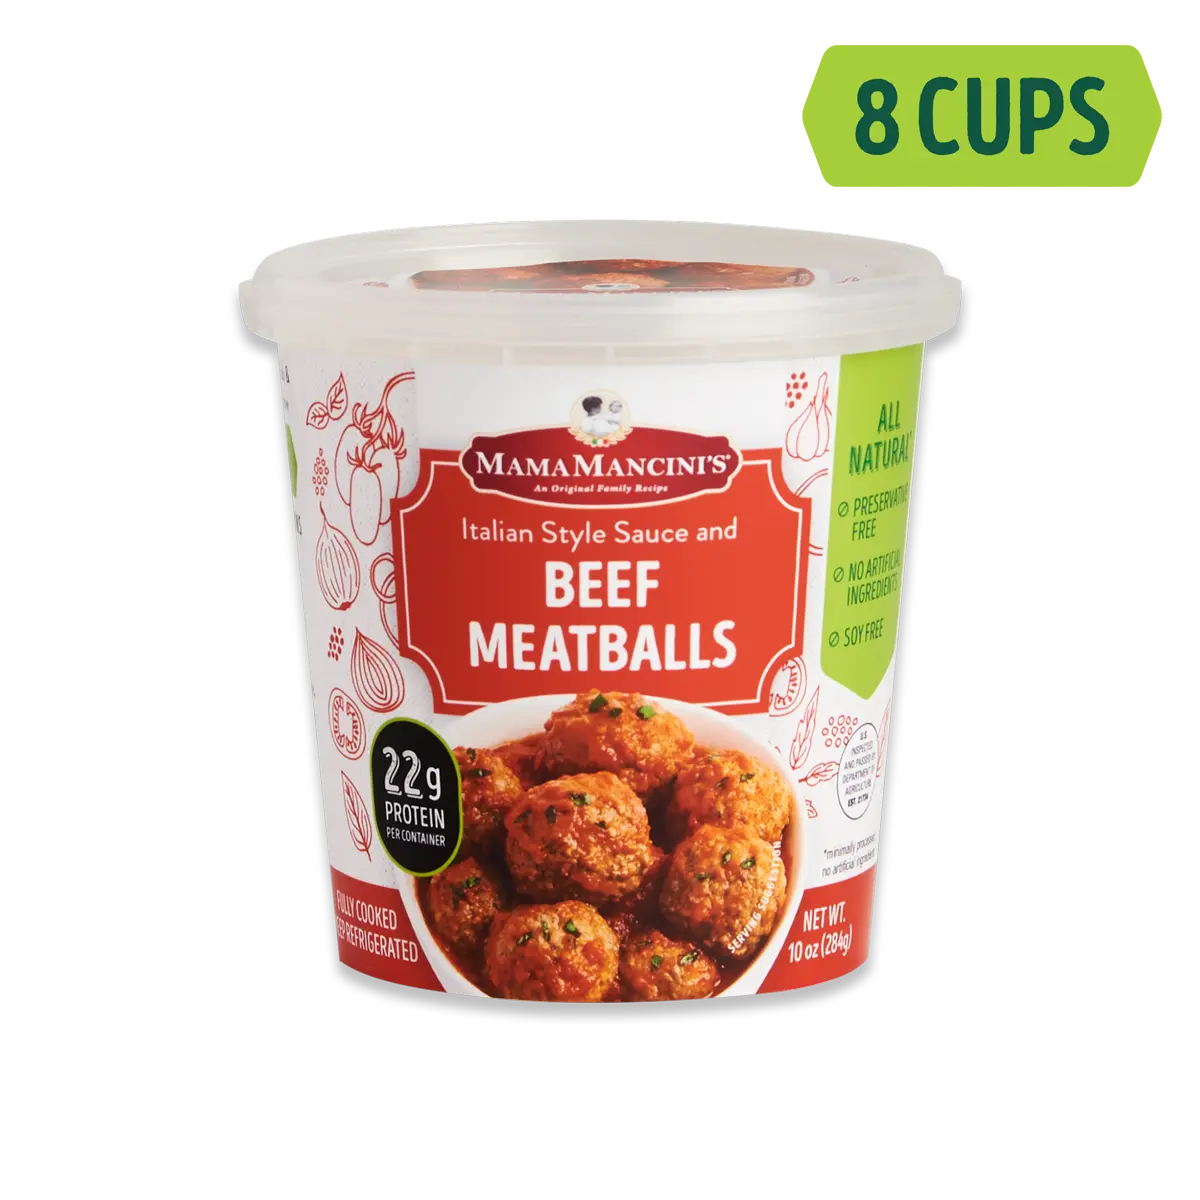 Beef Meatballs in Italian Style Sauce 10oz Cup (8 Pack)